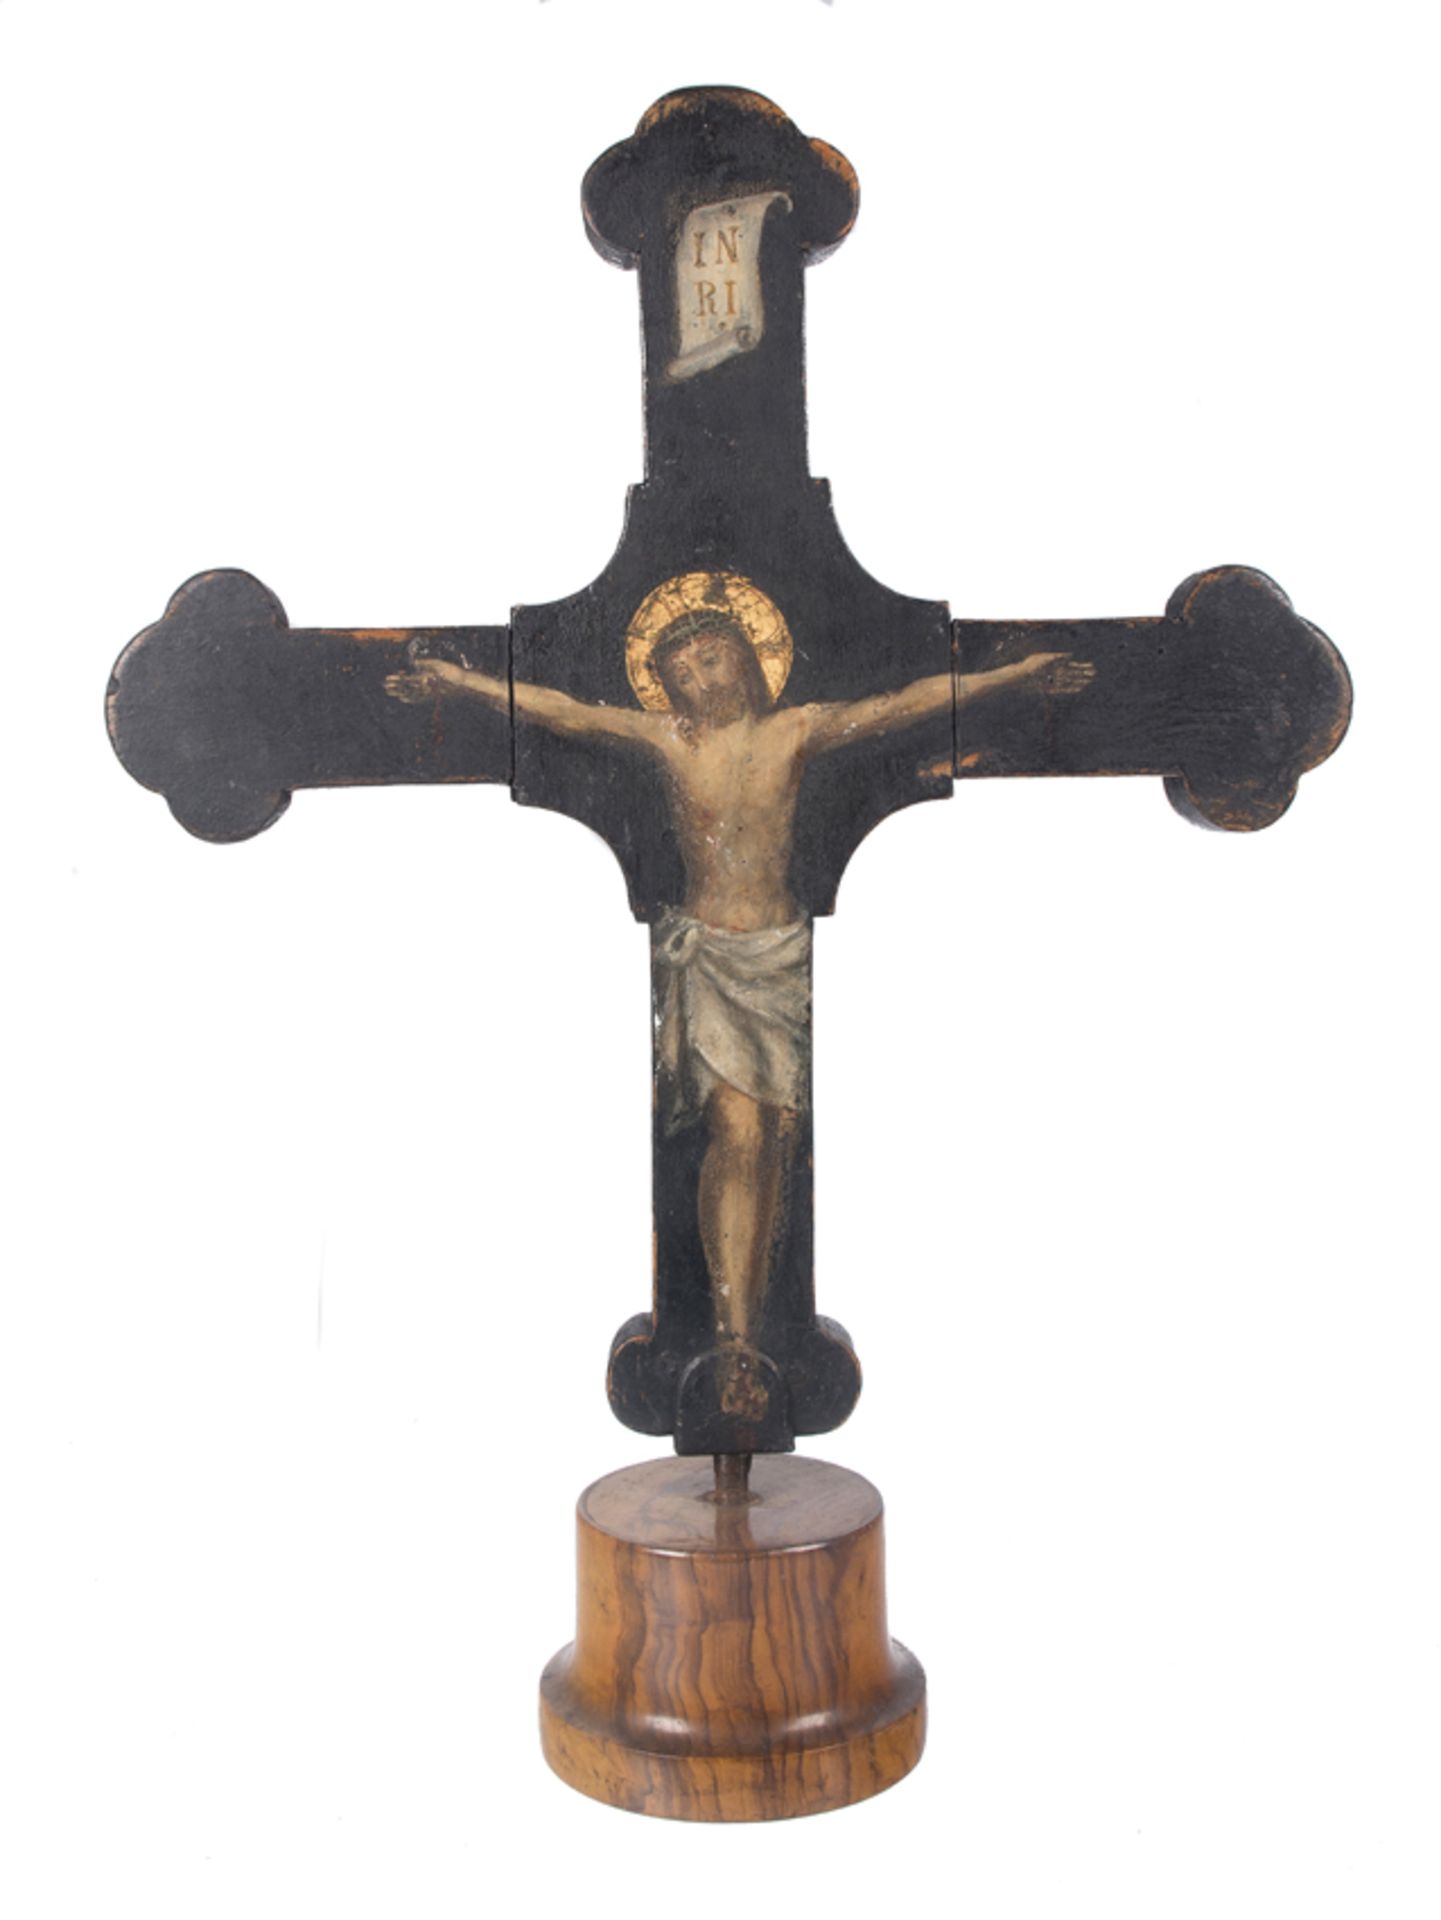 Black-dyed and polychromed wooden Spanish cross with iron fittings. 17th century.